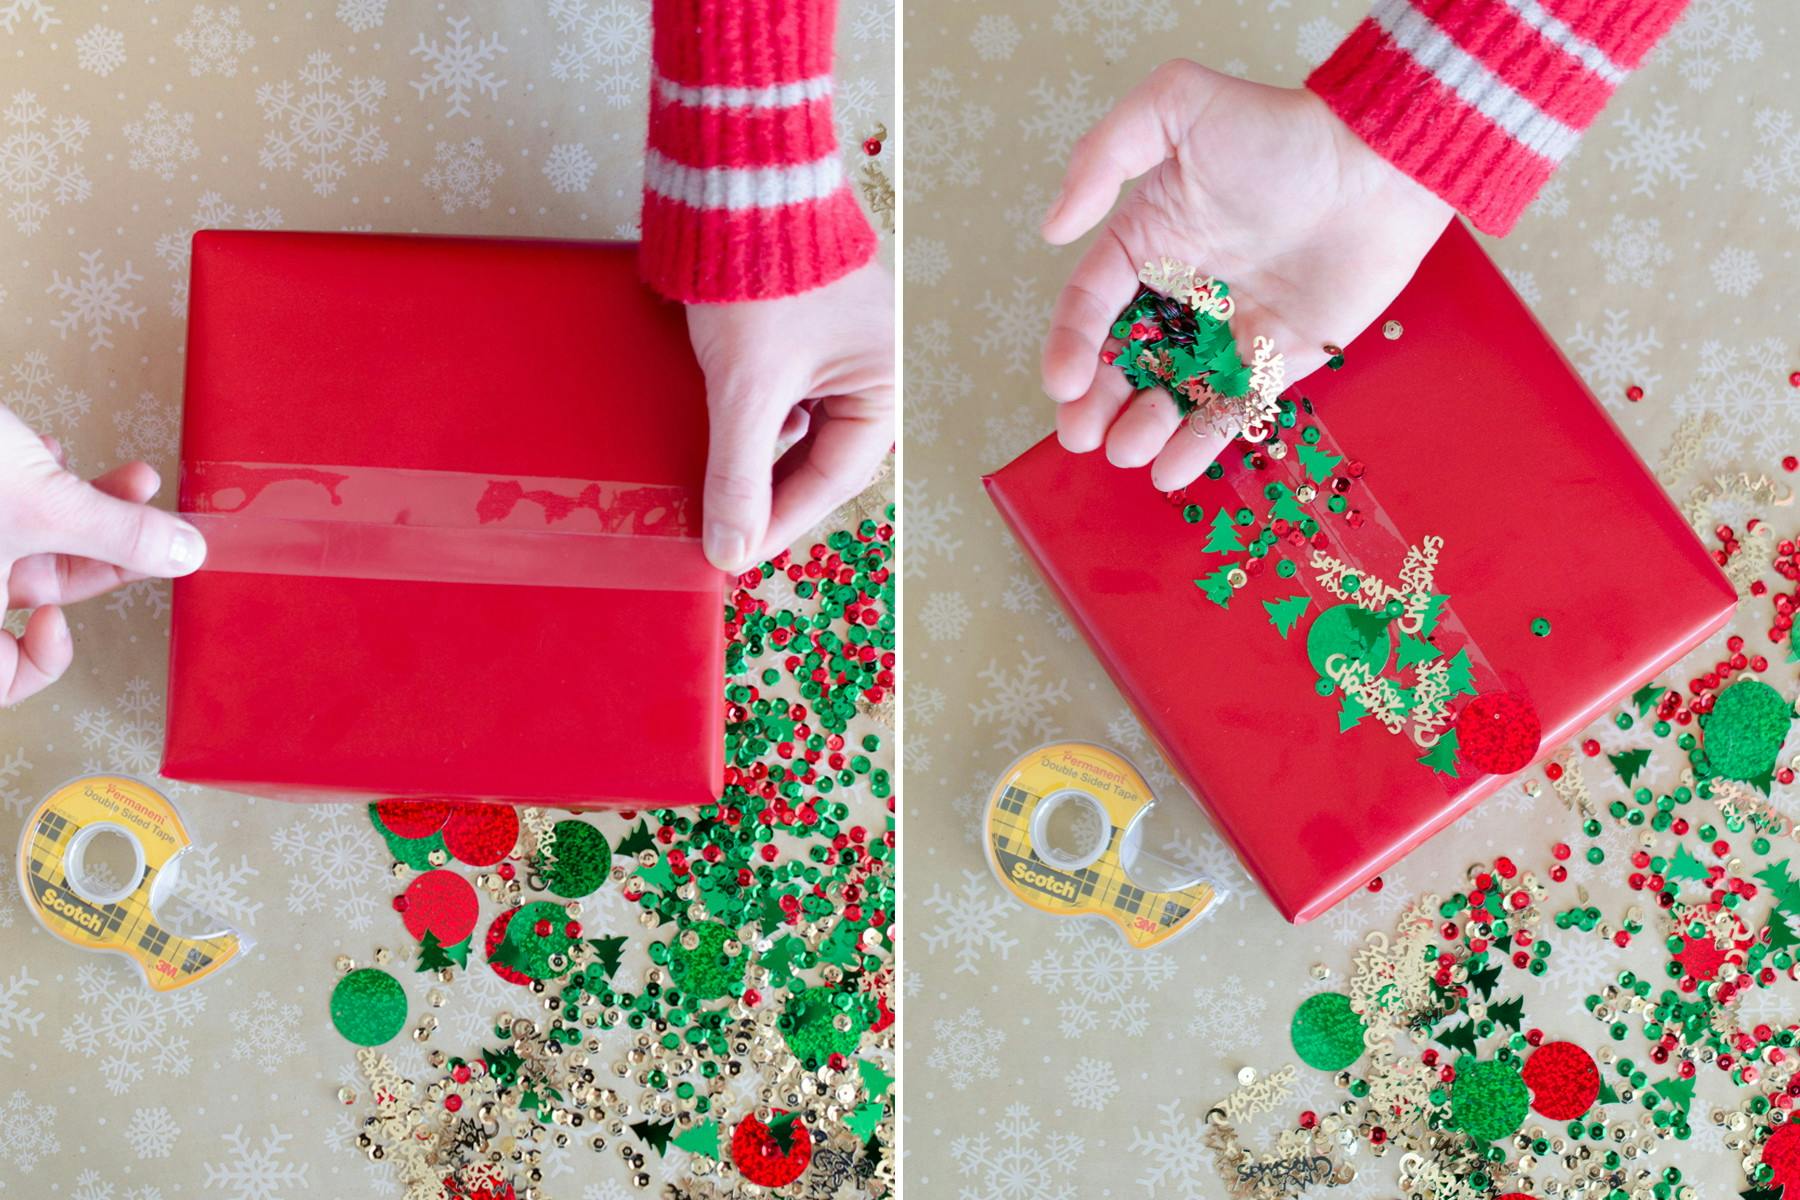 A gift box with double sided tape on the front, having confetti sprinkled on it.